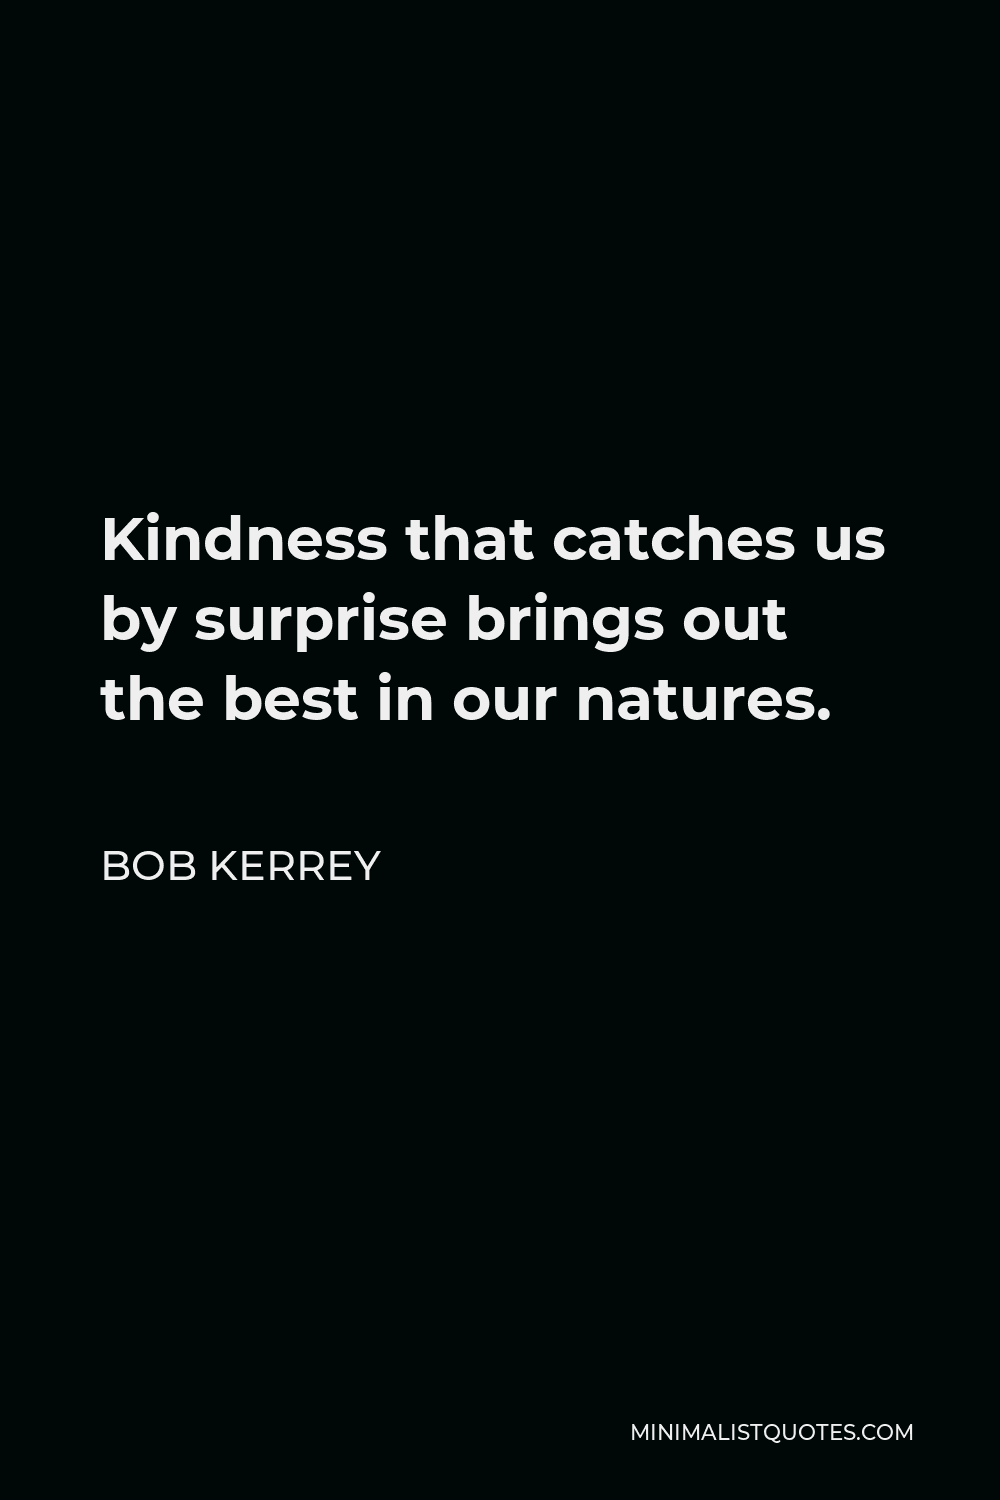 Bob Kerrey Quote - Kindness that catches us by surprise brings out the best in our natures.